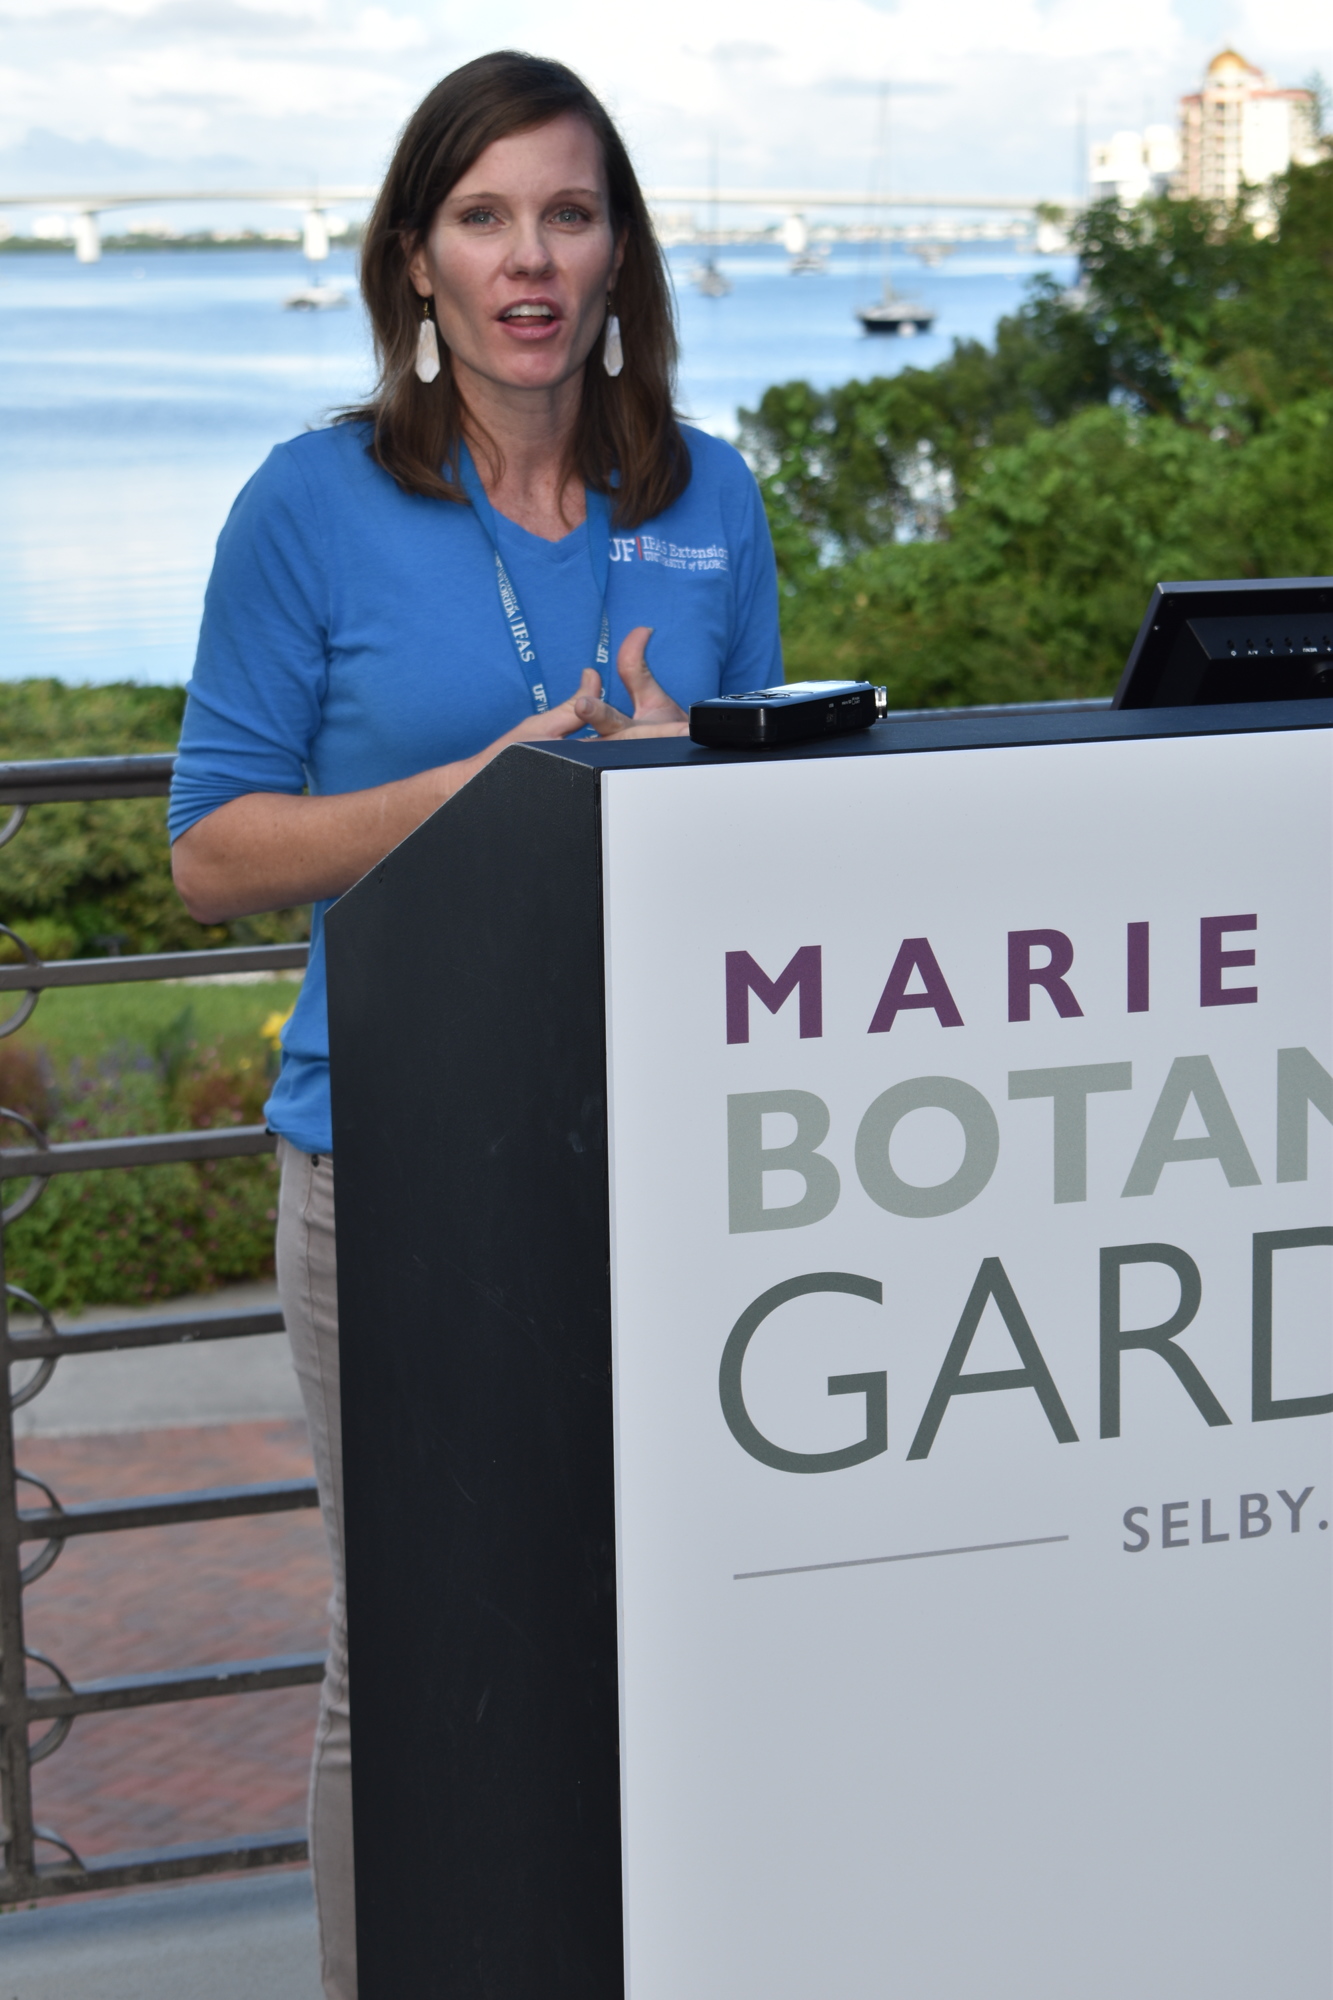 UF's Institute of Food and Agricultural Sciences Extension Water resources extension agent Dr. Abbey Tyrna spoke Monday morning about the science of the 